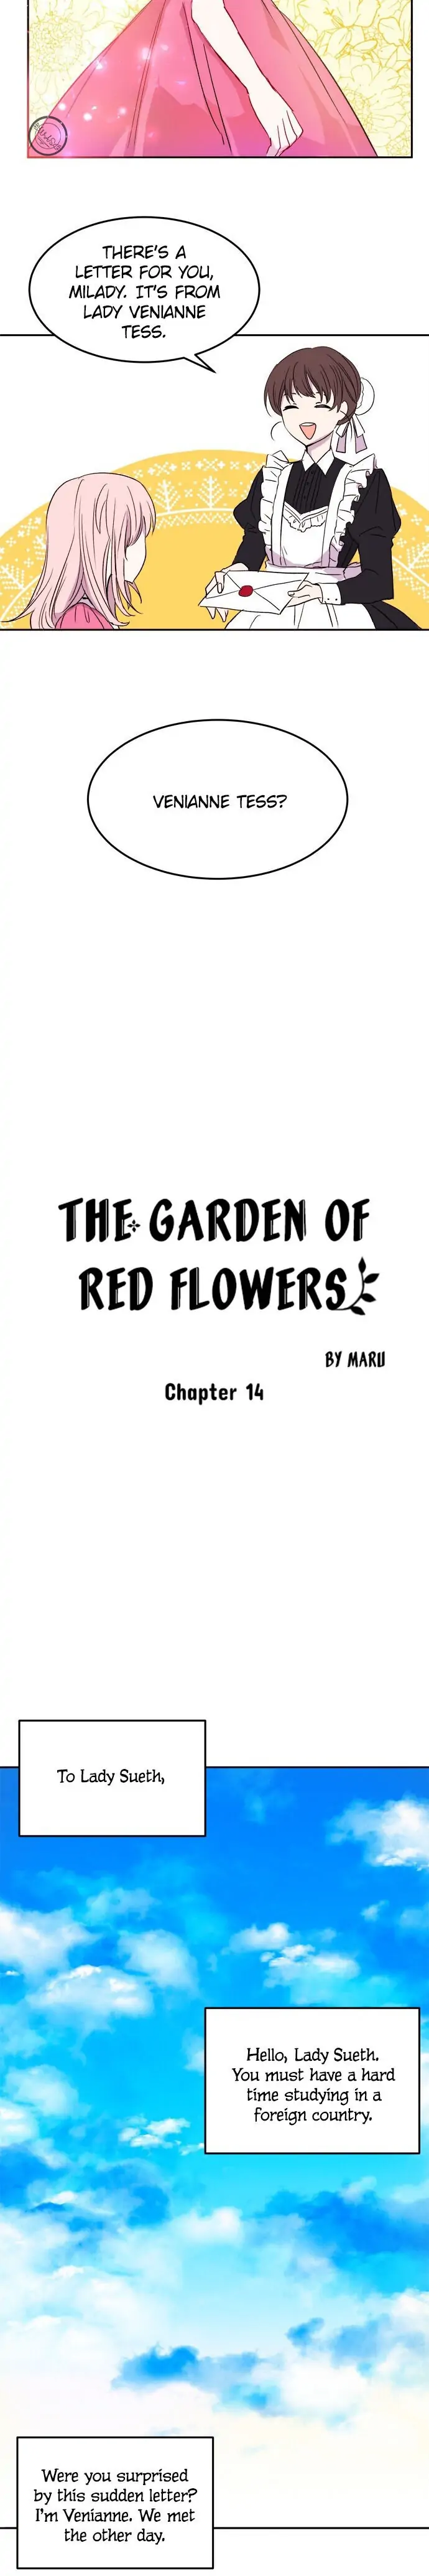 The Garden of Red Flowers chapter 14